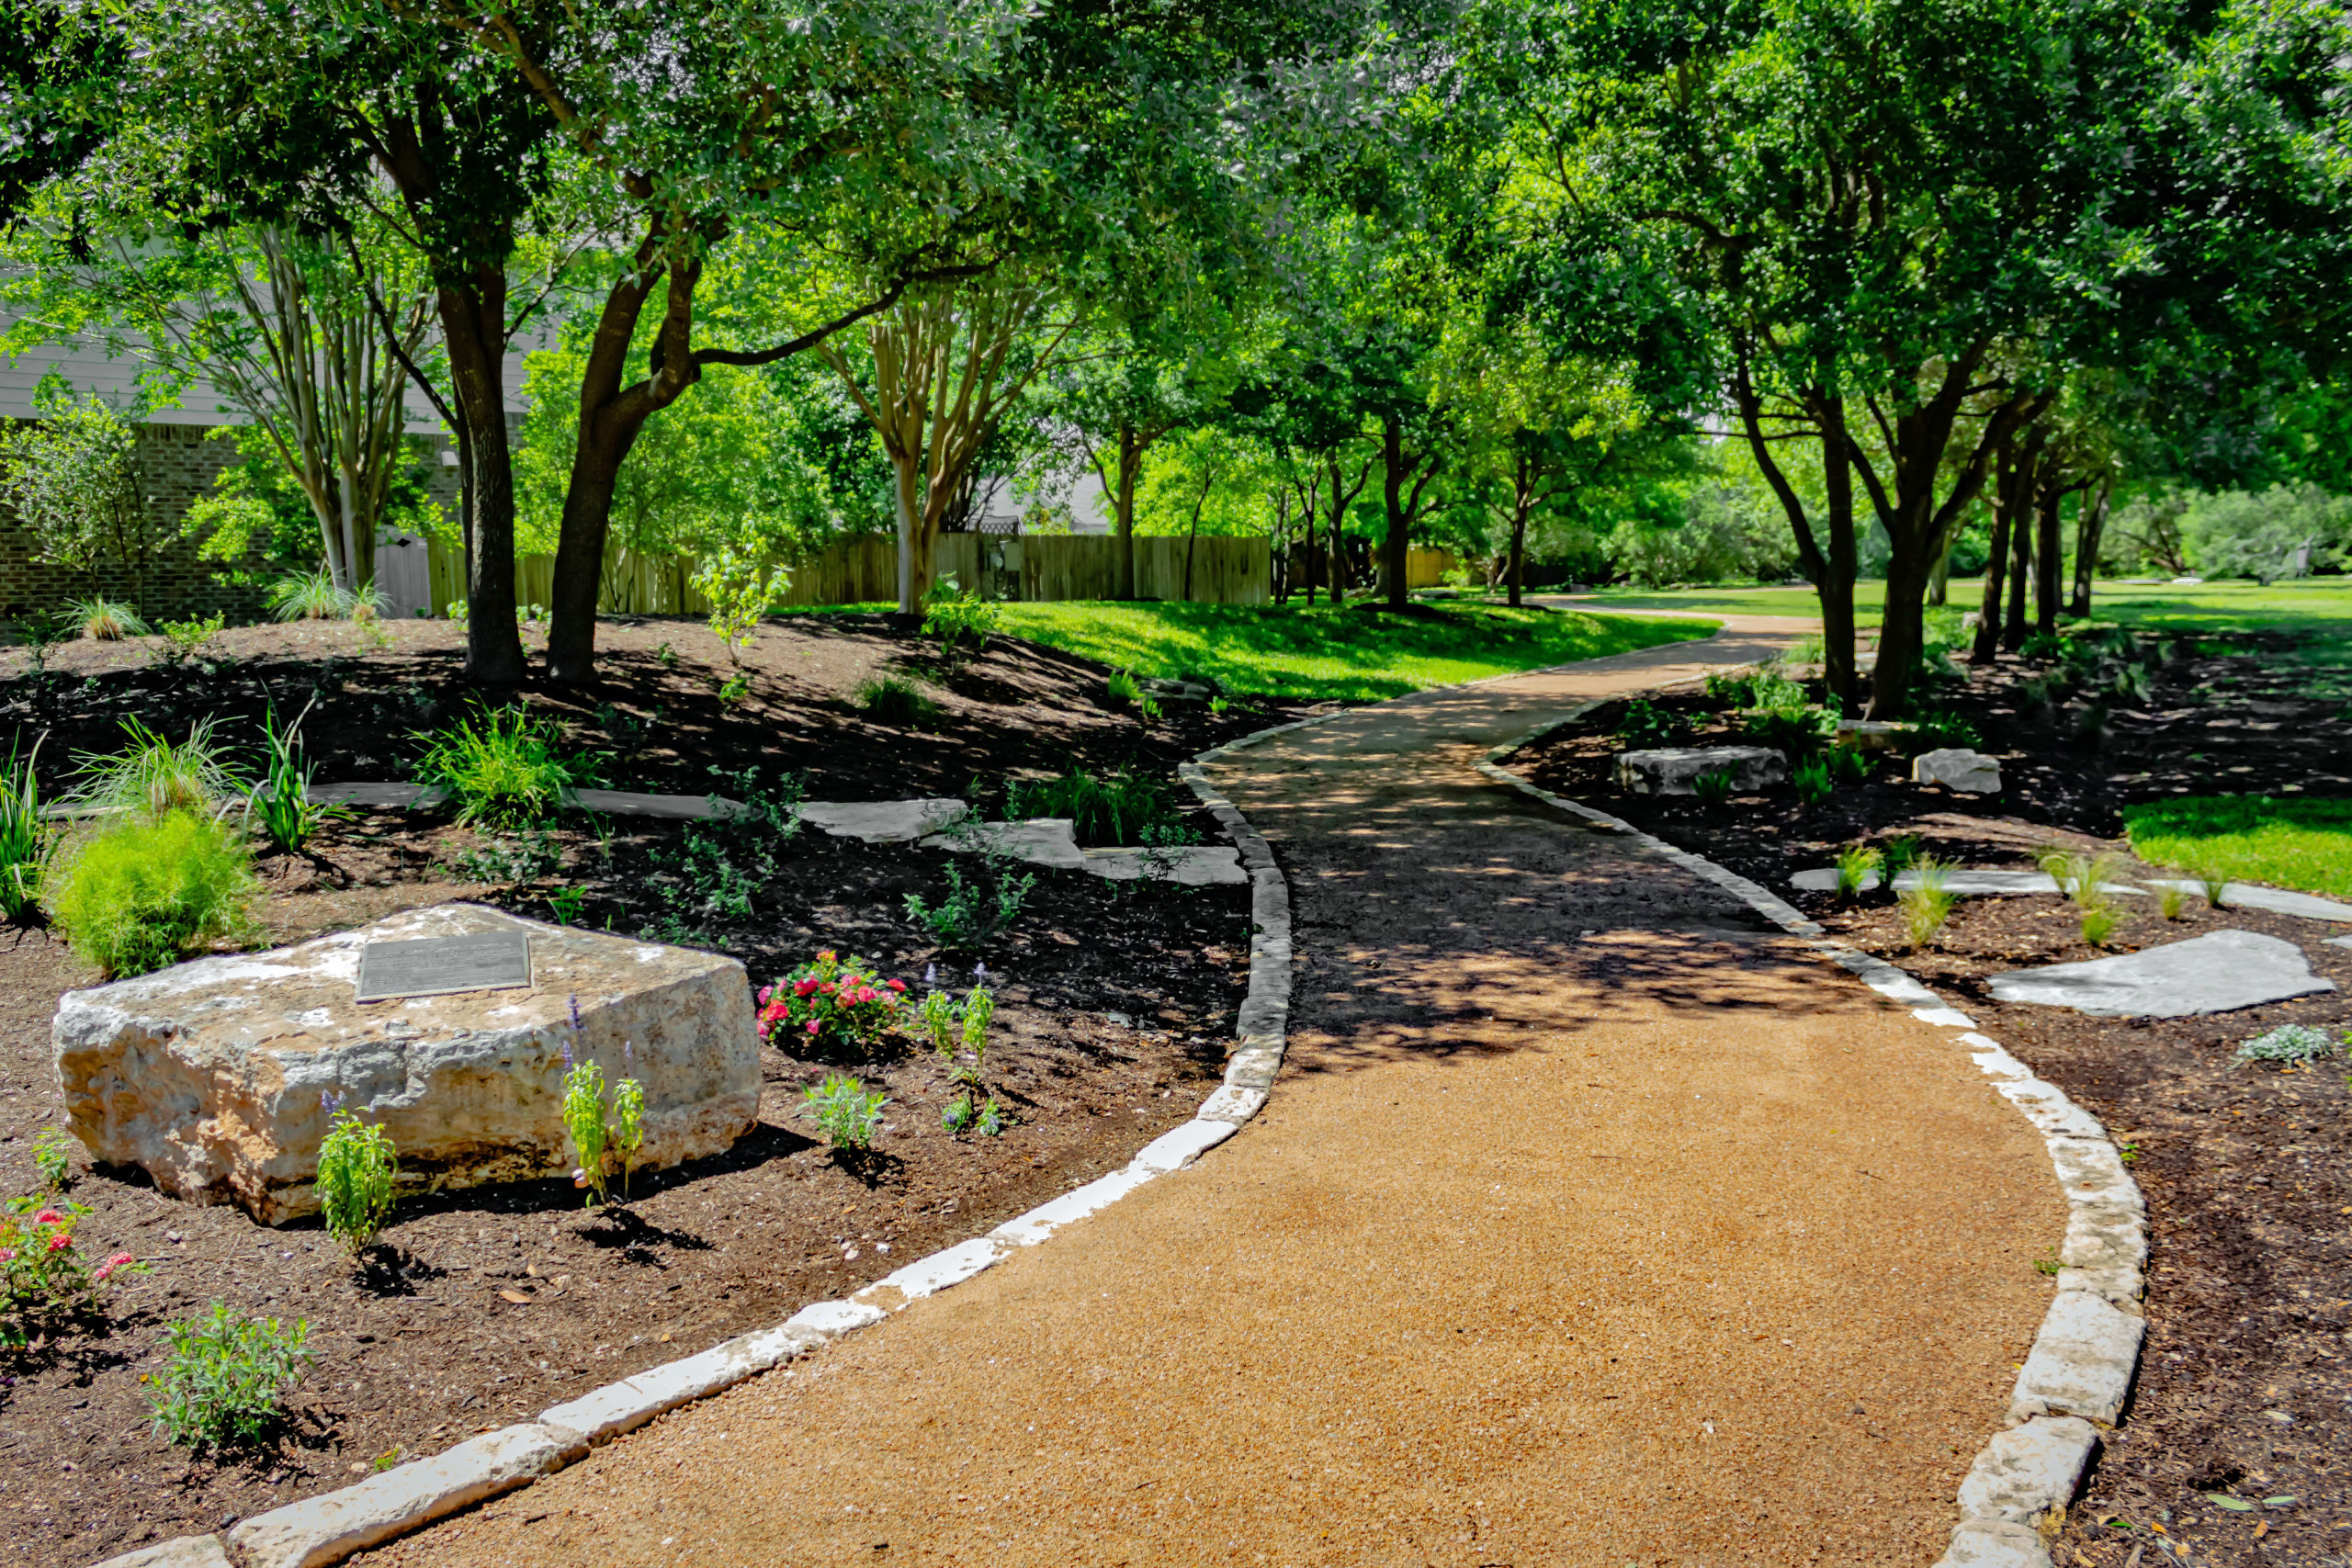 Picture of a gravel walking path among flowers and trees.